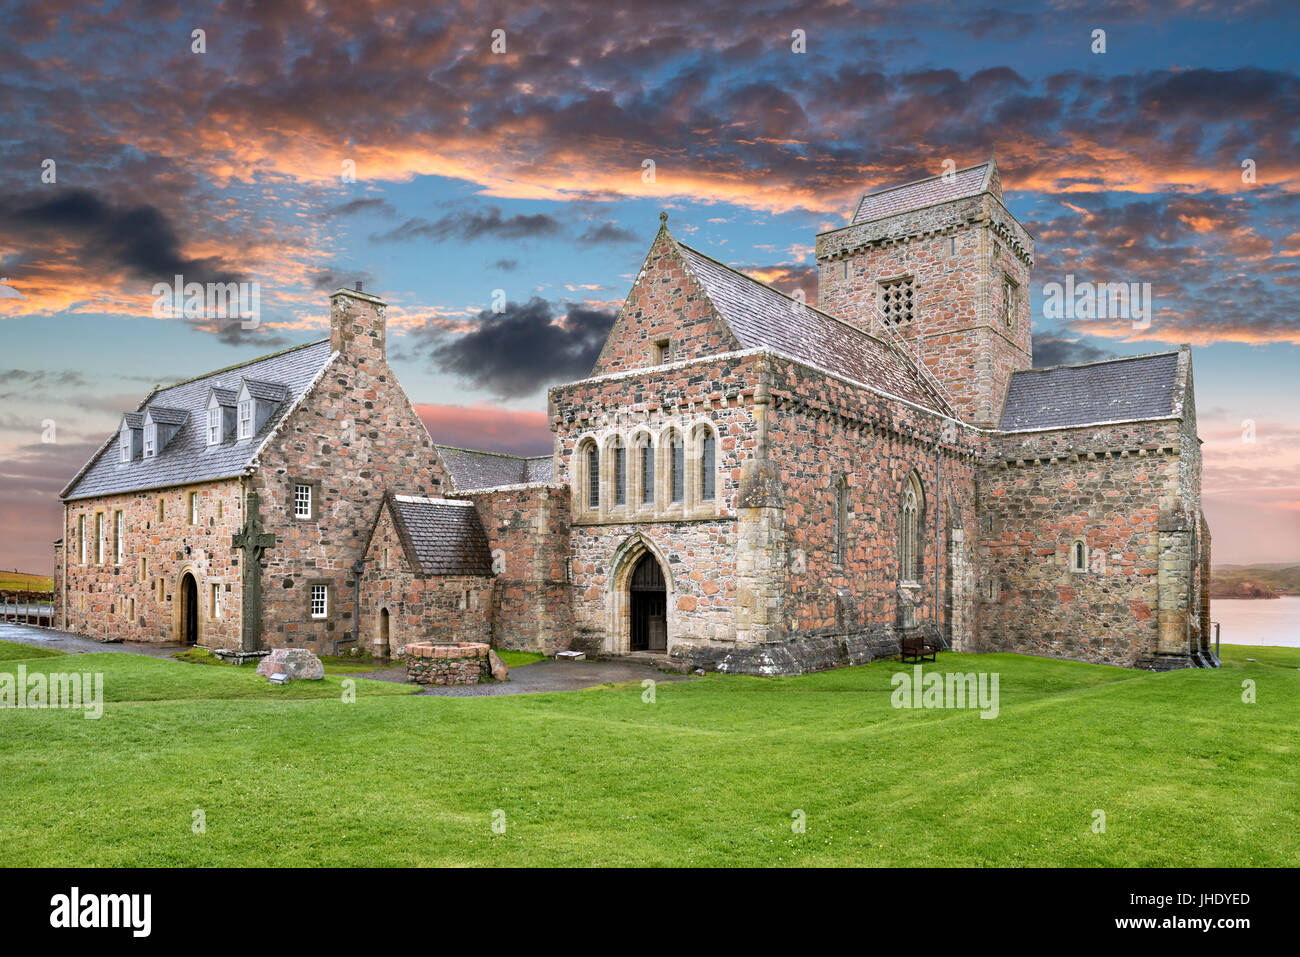 L'Abbaye d'Iona, l'île d'Iona, Argyll and Bute, Ecosse, Royaume-Uni Banque D'Images